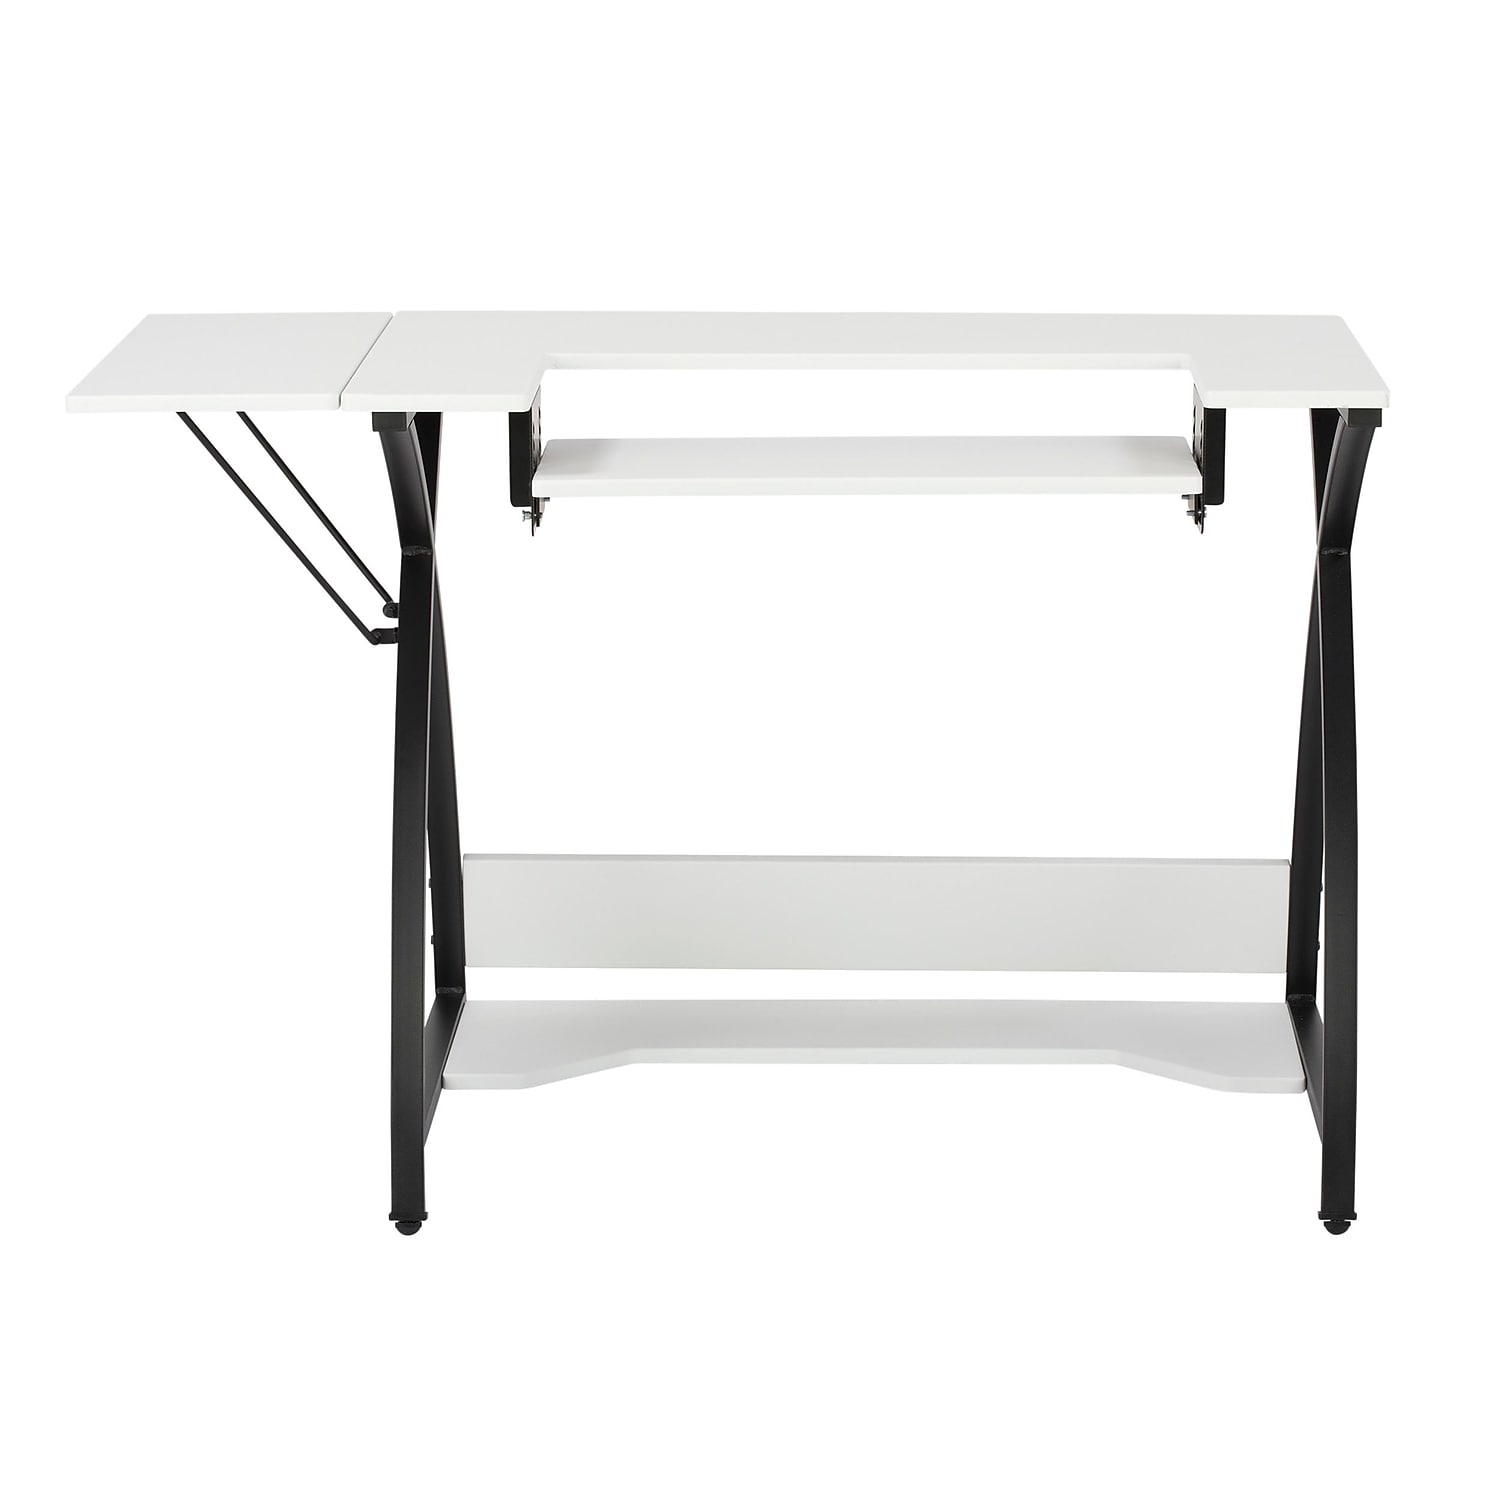 Sew Ready 13332 Comet Modern Sewing Table in Black / White - image 4 of 7